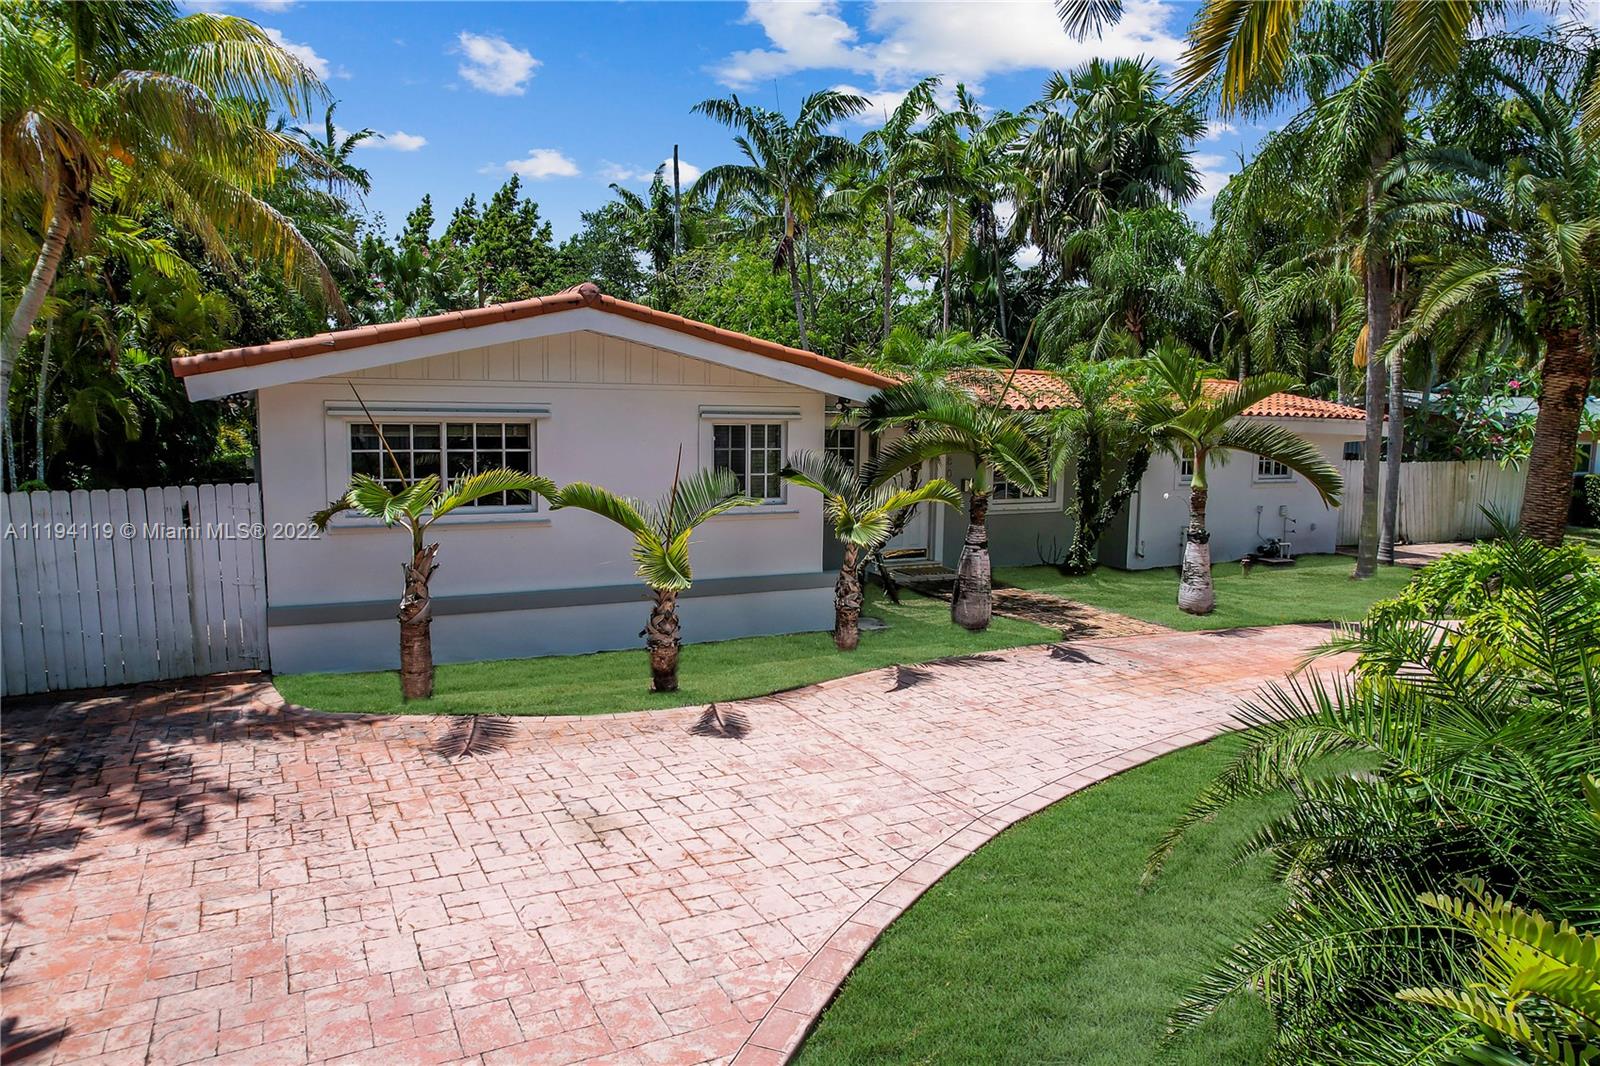 This spectacular 4 BR/3BTHS residence in Pinecrest sits on a 15,000 sq. ft lot and it is perfect the perfect home for entertaining: updated eat-in kitchen with stainless steel appliances, granite countertop and modern cabinets, spacious dining room with a beautiful view and access to the lush backyard, large living room, spacious family room and laundry room. This gorgeous home also has a great patio with a large backyard and an ample front entrance with a circular driveway with plenty of parking. Just blocks away from US-1 with easy access to major stores, fine dining and entertaining. A+ excellent school district. Come and show, all offers will be considered.